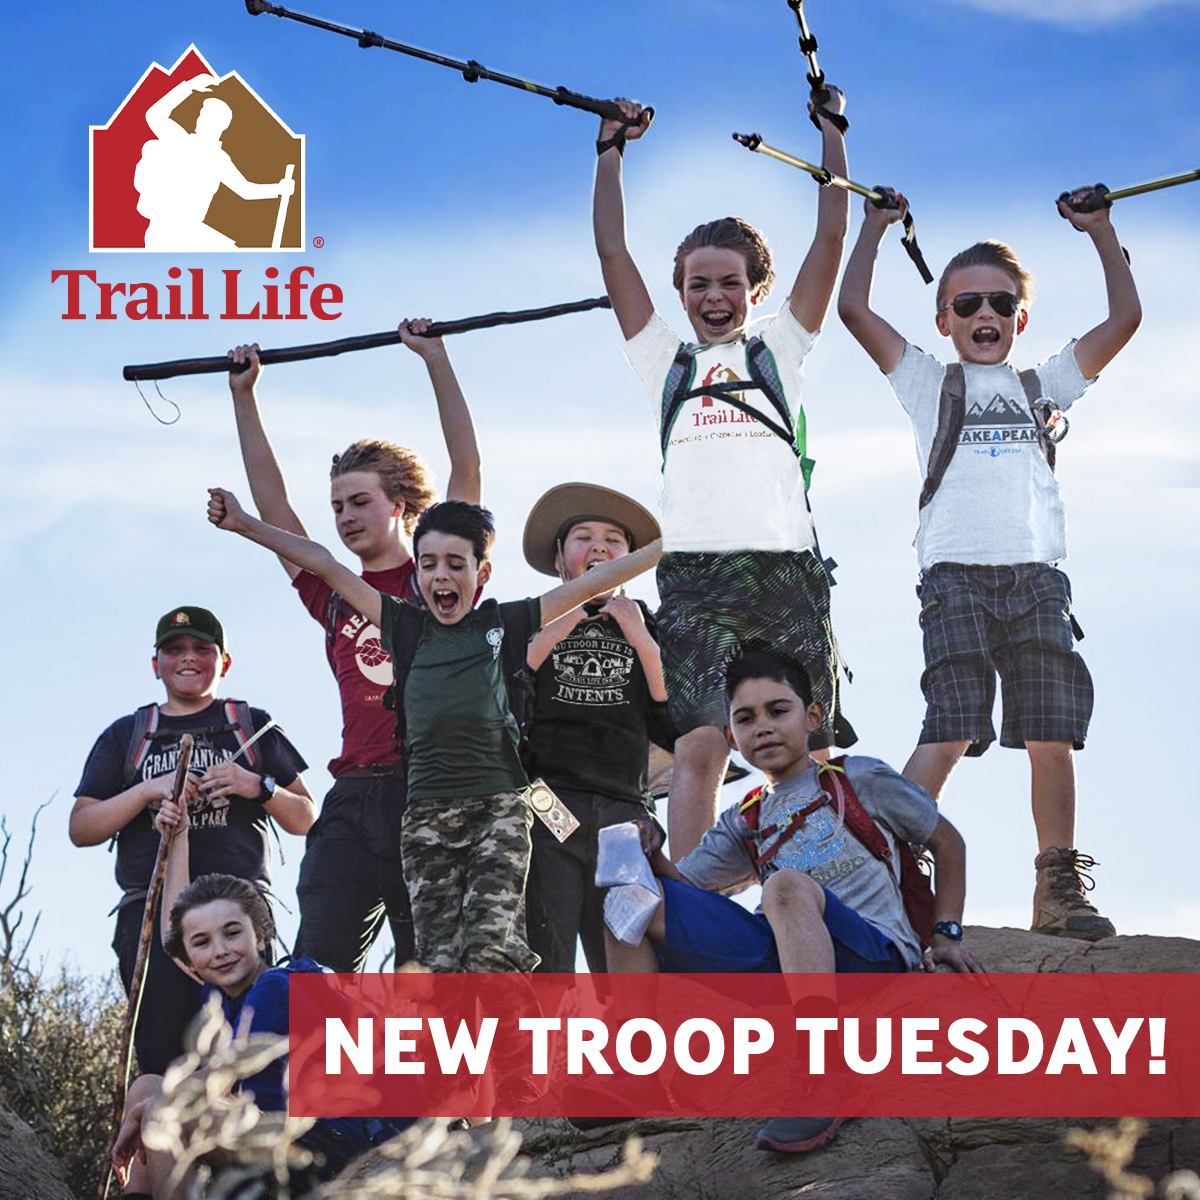 #TrailLifeUSA continues to grow! Join us in welcoming 5 new Troops to the Trail Life family! #JointheAdventure! Find a Troop near you or Start one Today! NC-0249 Mayodan IN-1882 Munster WV-1919 Logan NC-6828 Gibsonville OK-1111 Oklahoma City traillifeusa.co/3VJr9L3